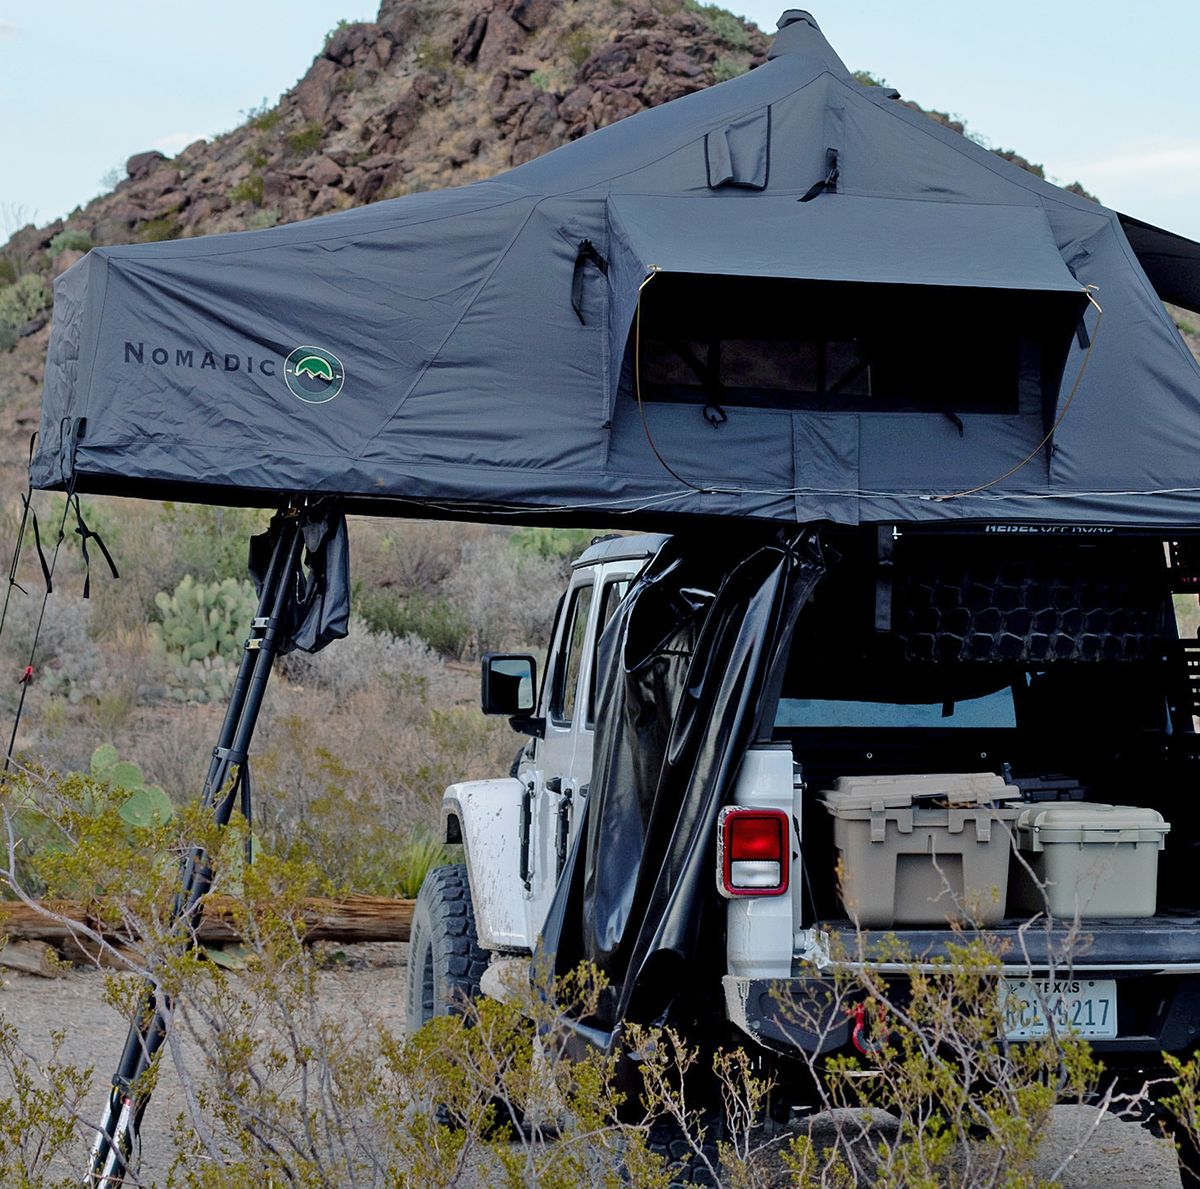 Vehicle Systems Nomadic 3 Review: A Great, Affordable Rooftop Tent